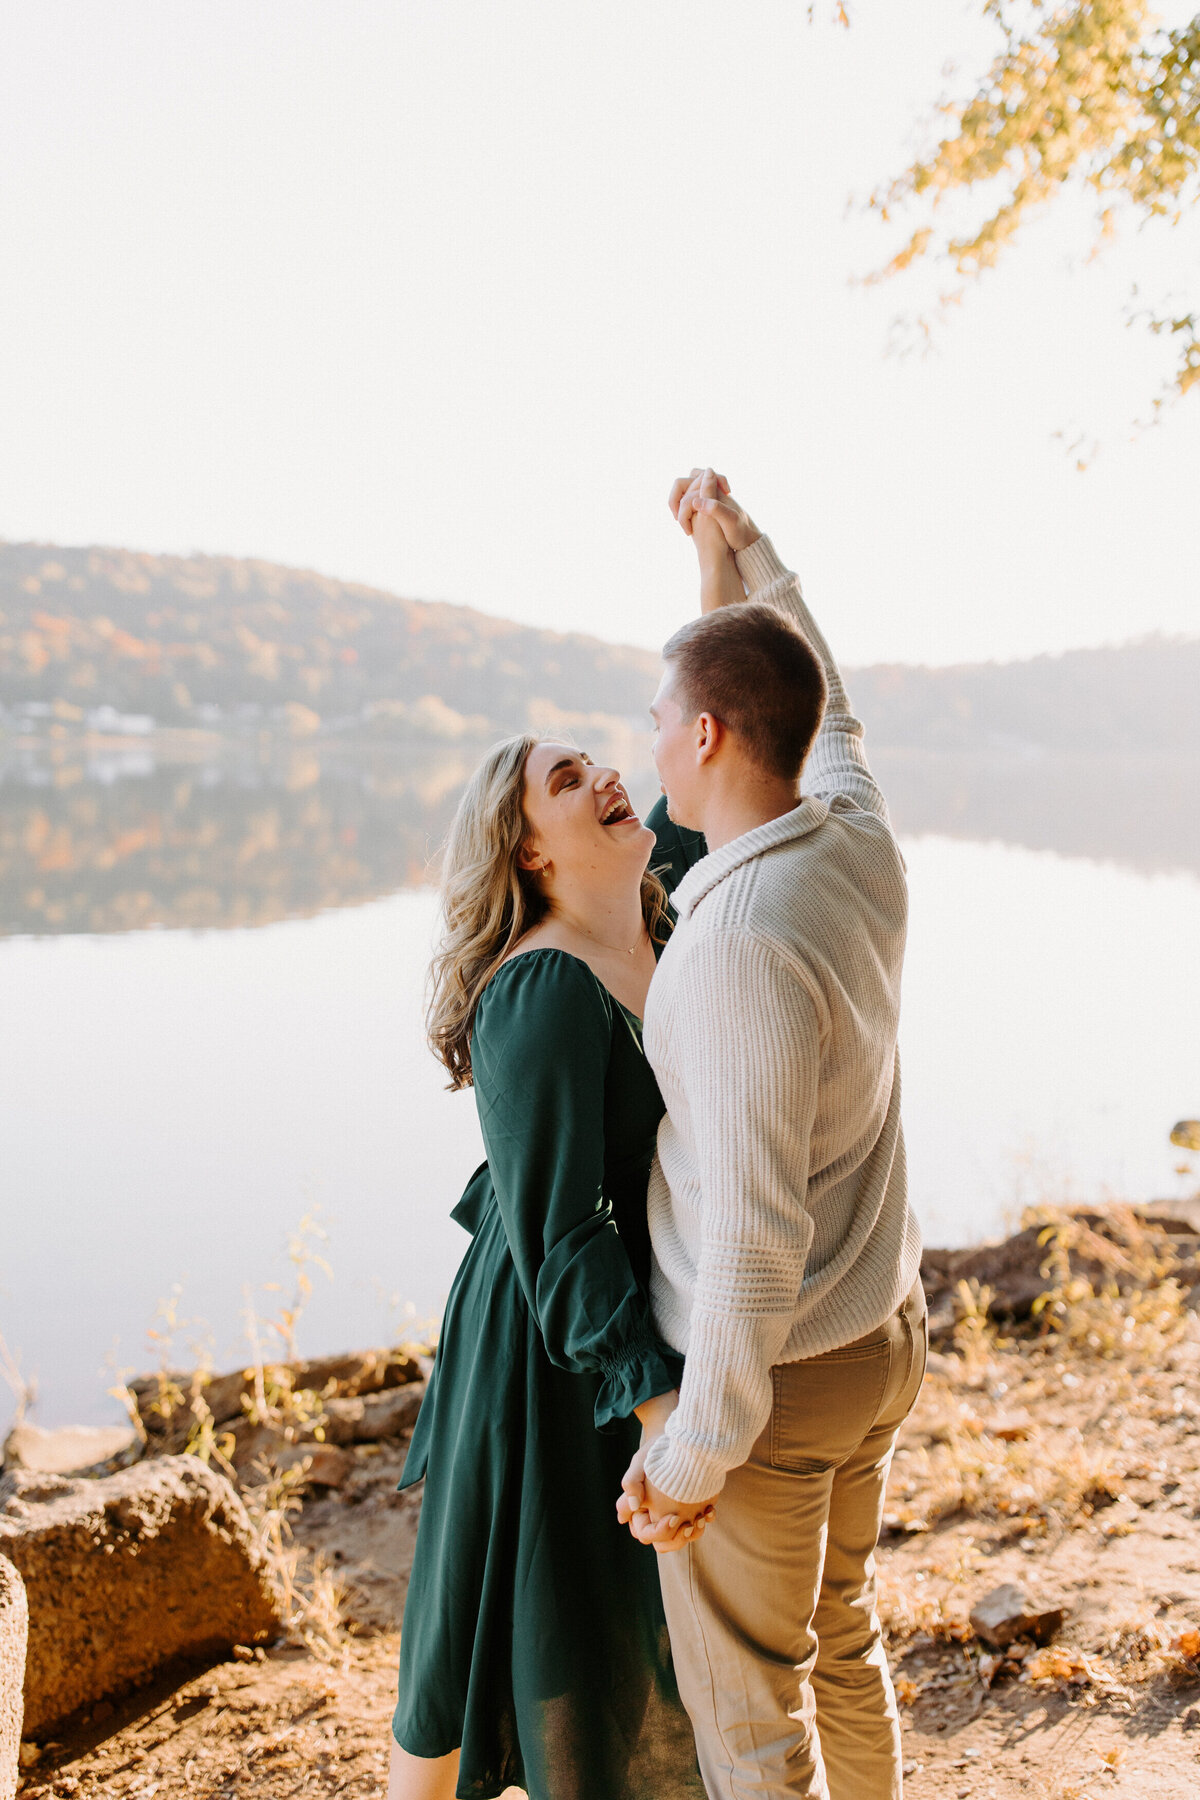 couple standing by a lake and smiling while holding their hands up